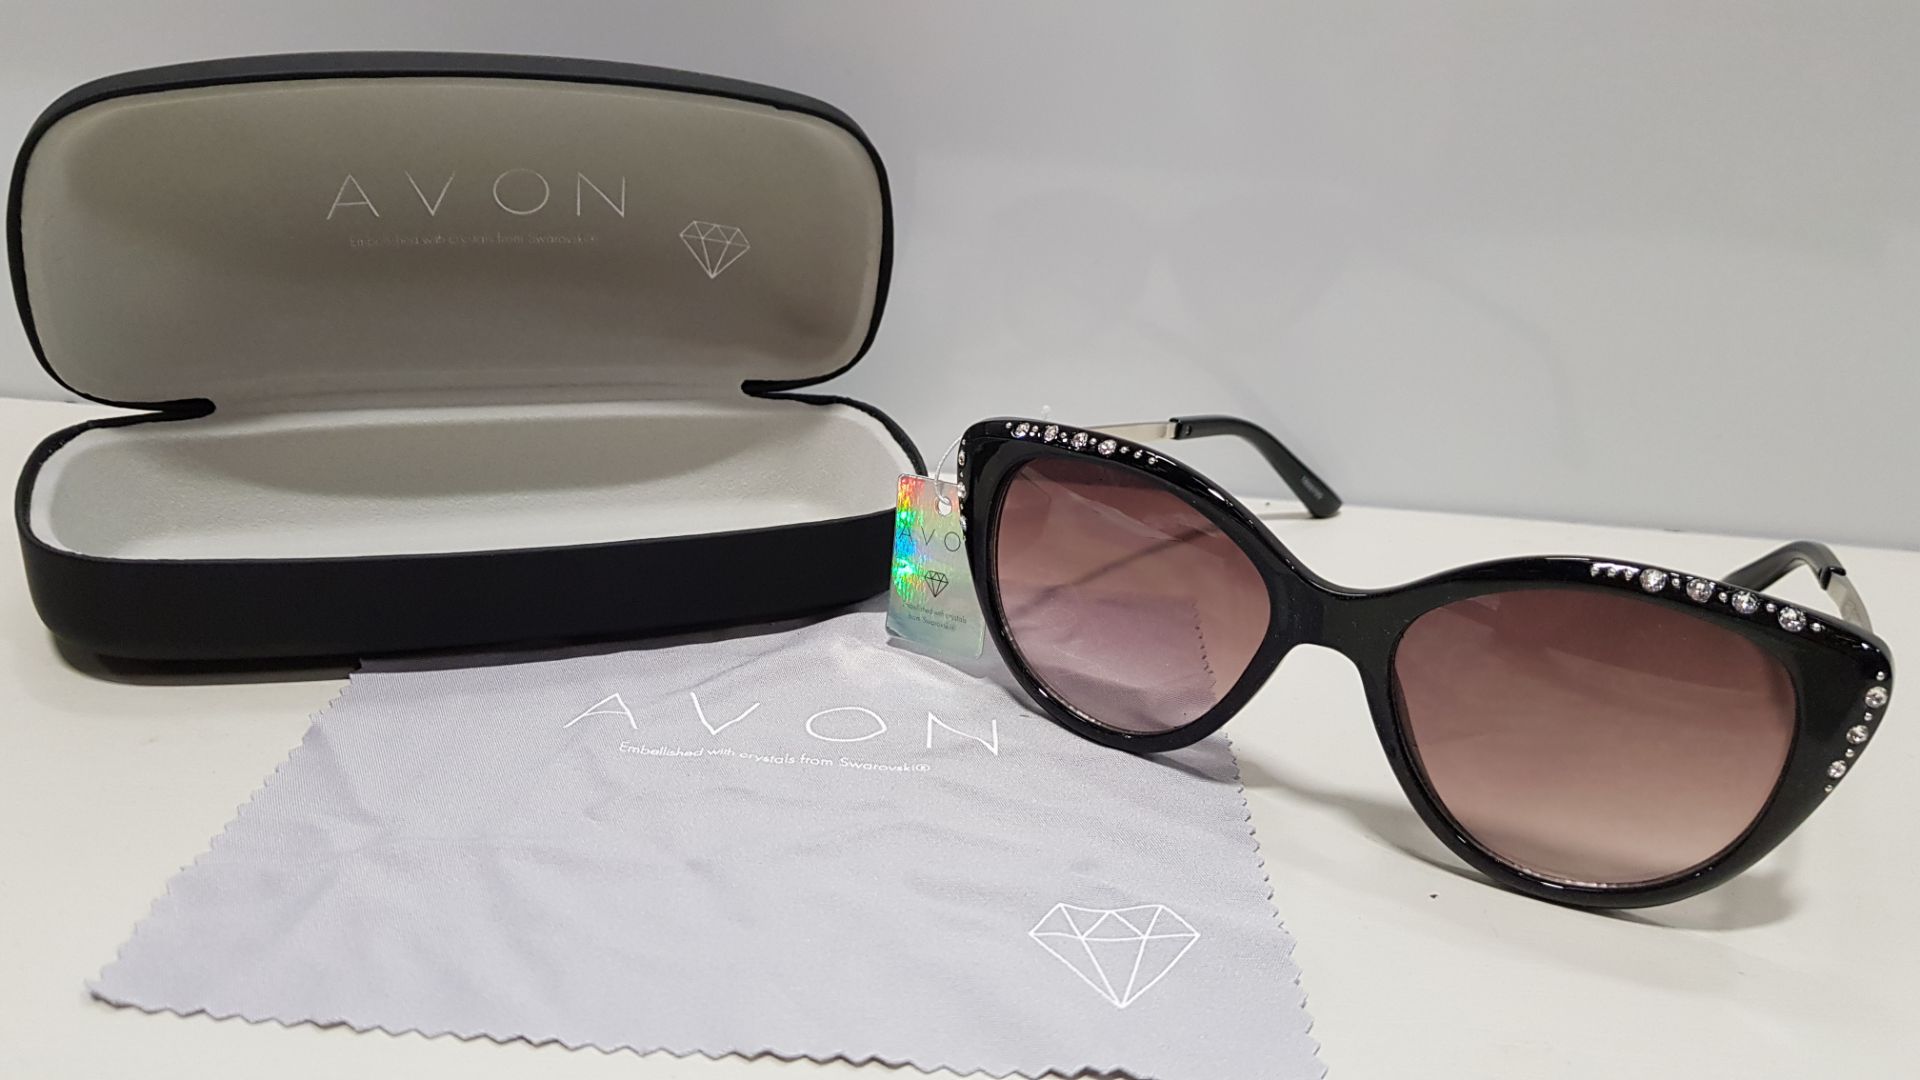 50 X PAIRS OF BRAND NEW AVON CATEYE SWAROVSKI SUNGLASSES WITH CARRY CASE & CLEANING CLOTH - IN 2